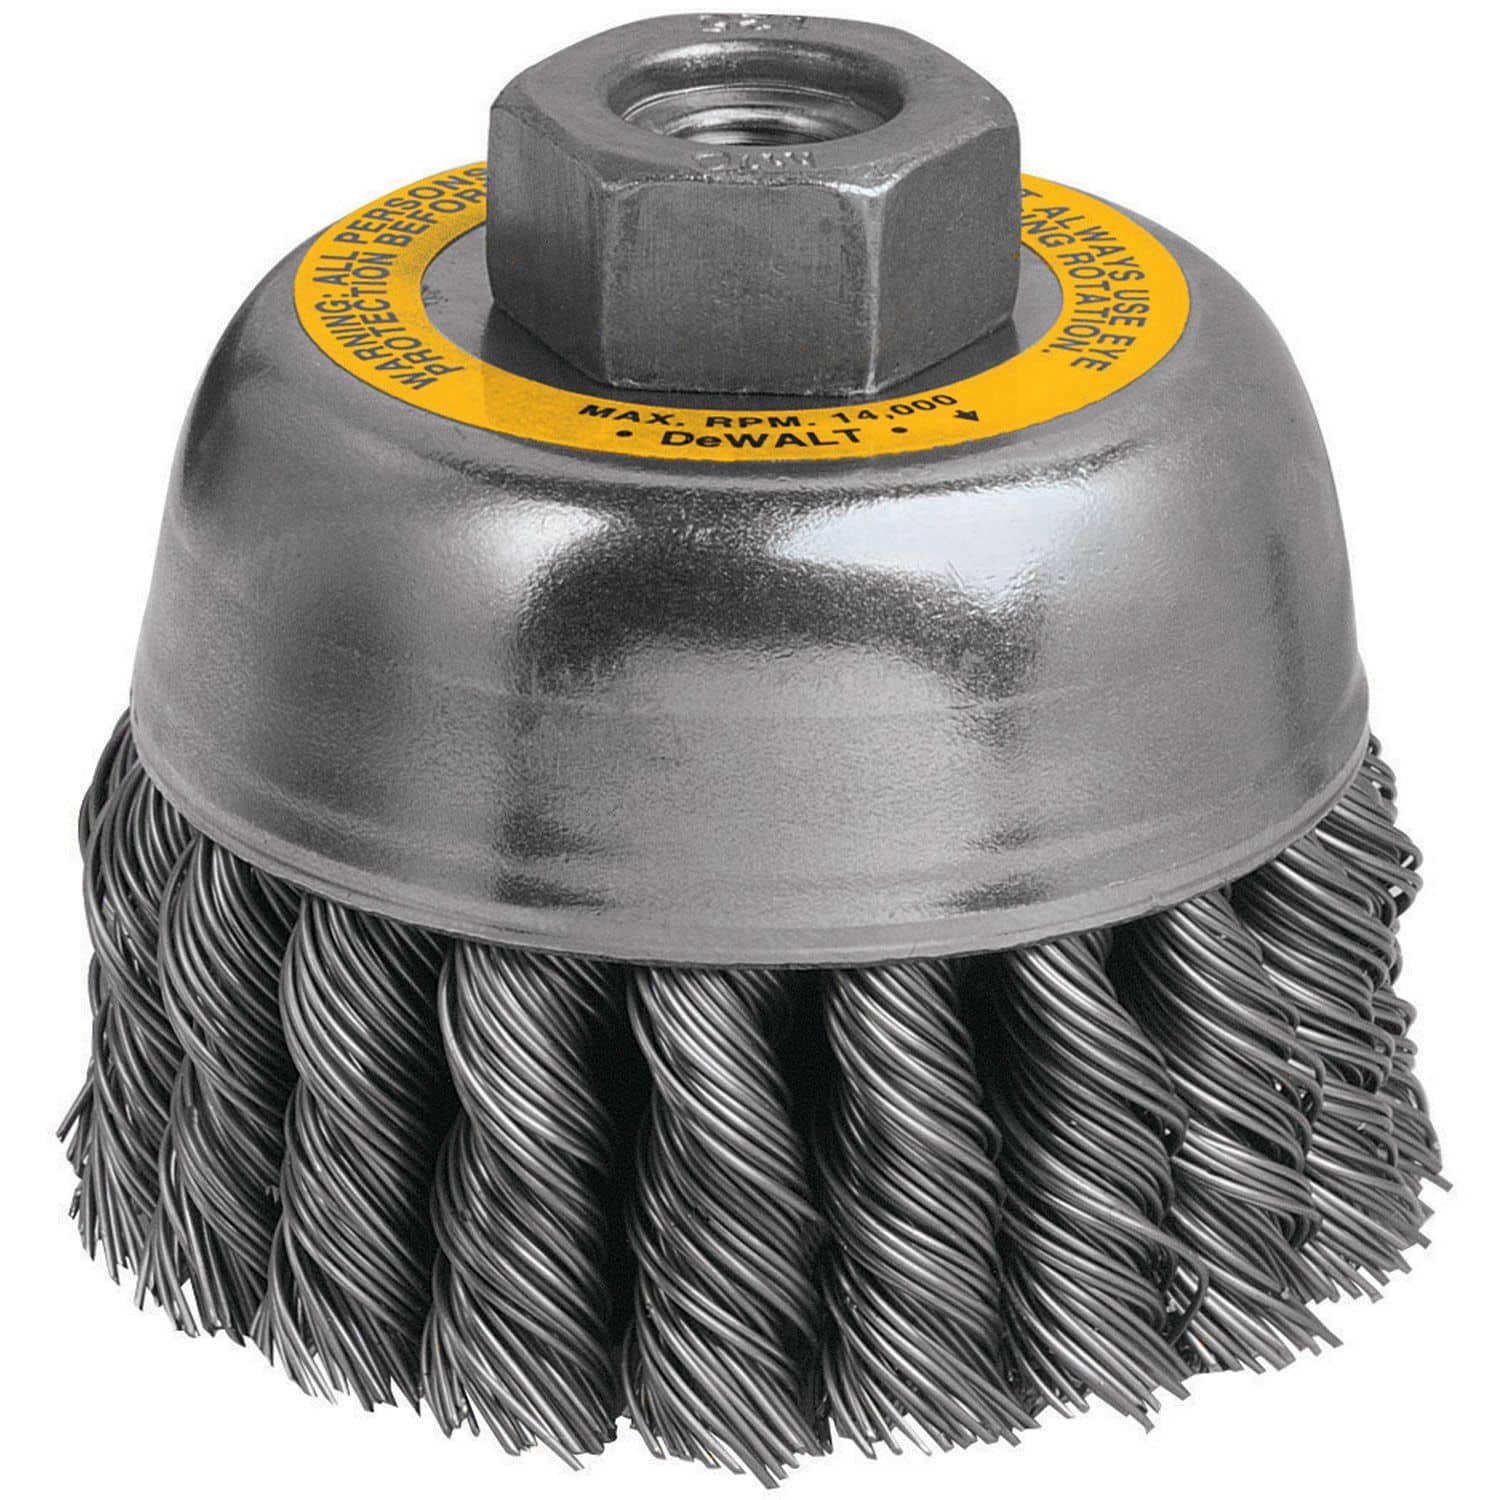 DEWALT Carbon Knot Wire Cup Brush, 3-in